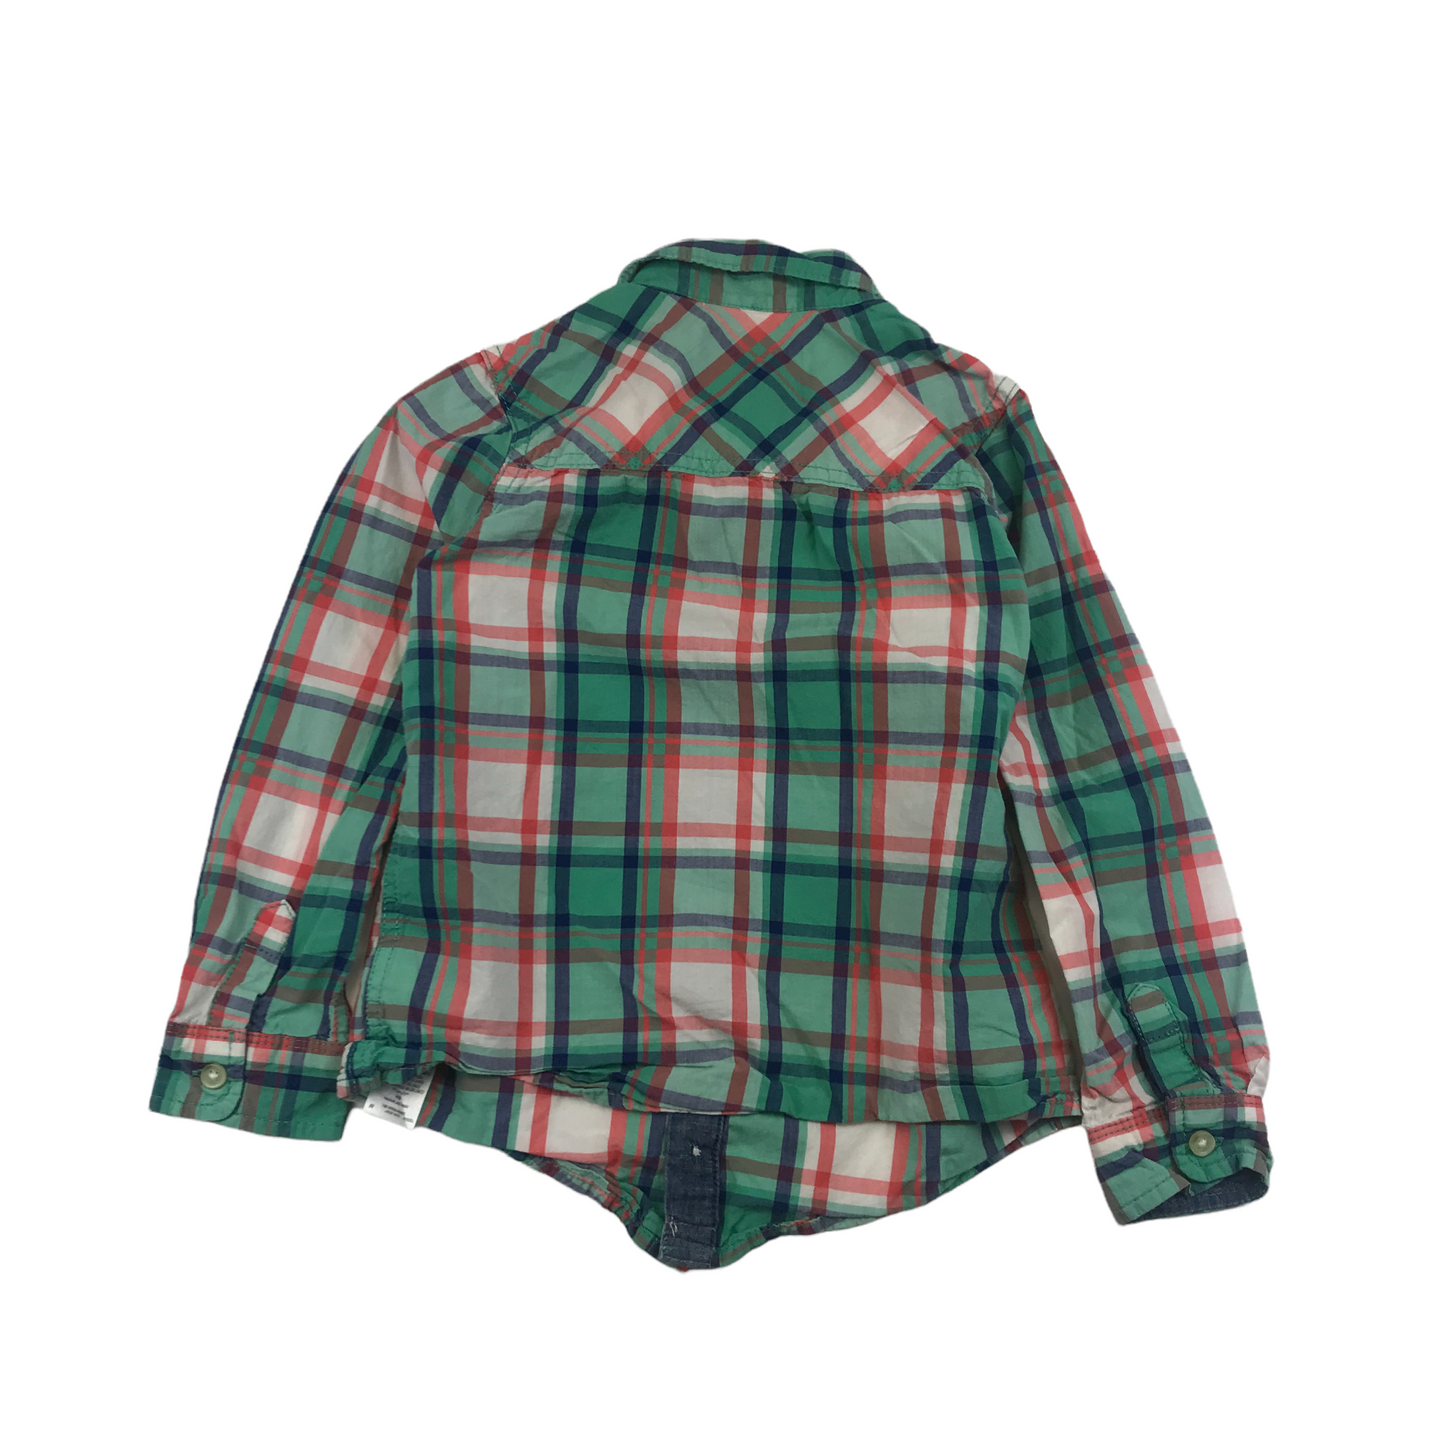 M&S Green and Red Checked Shirt Age 6